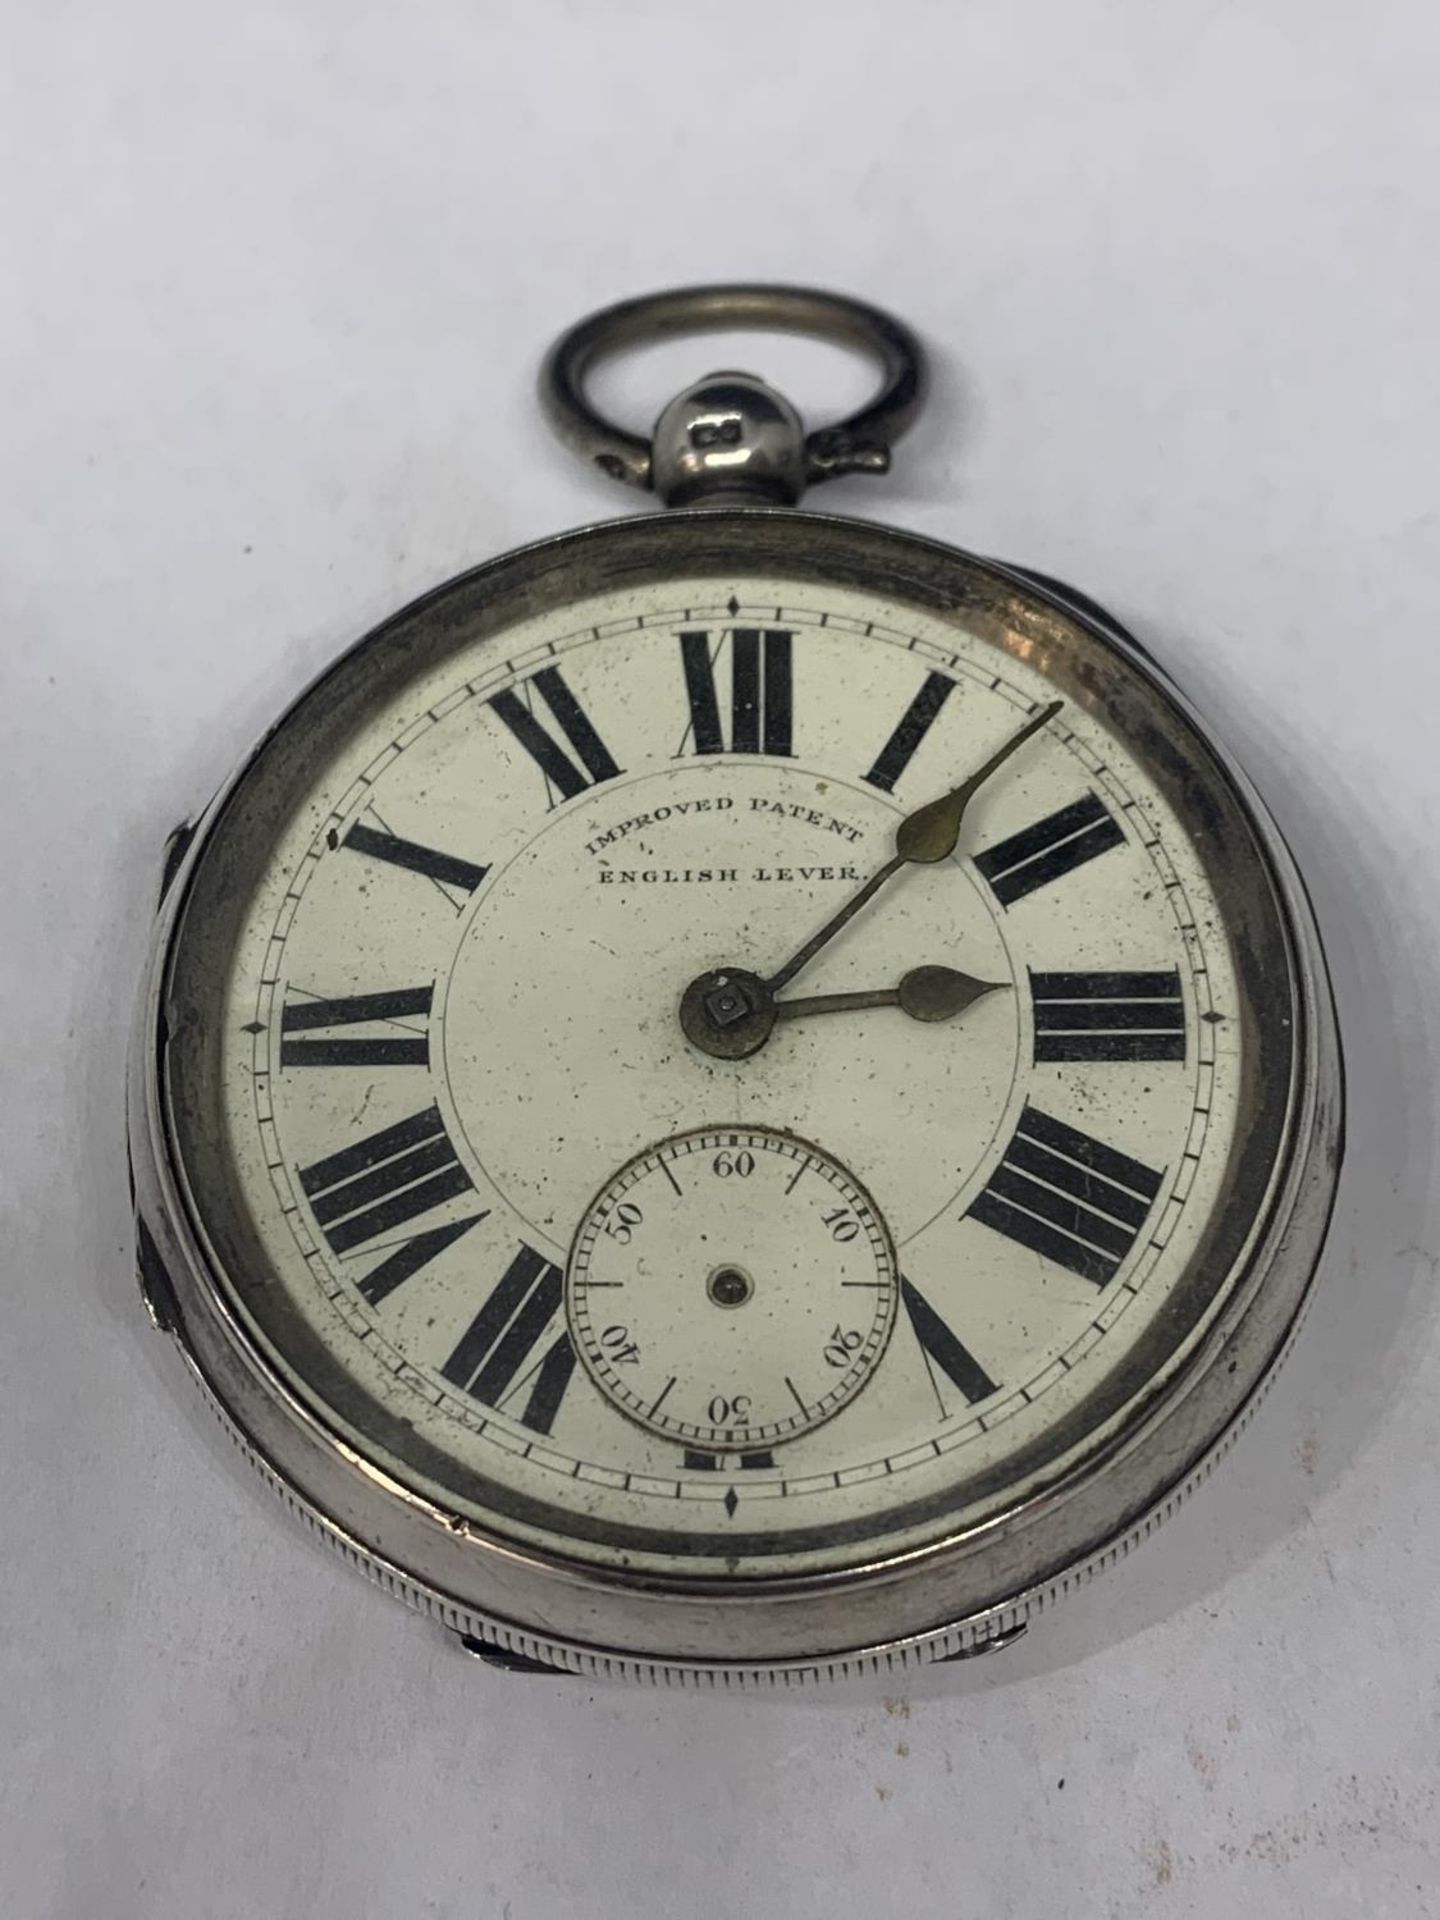 A CHESTER HALLMARKED SILVER ENGLISH LEVER ?IMPROVED PATENT? POCKET WATCH